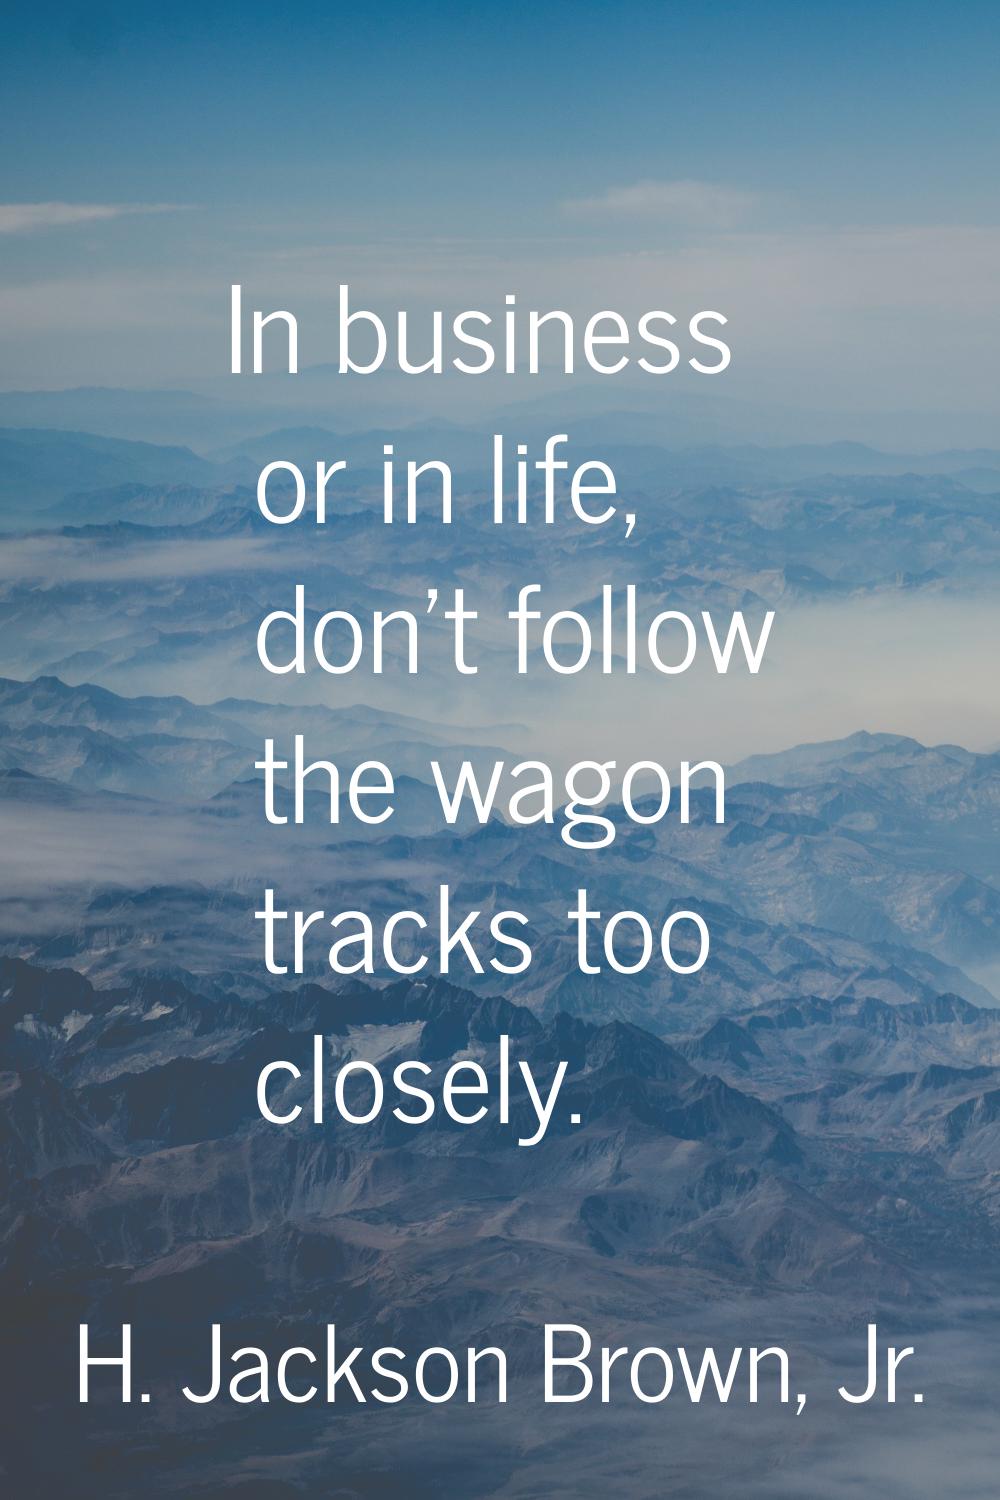 In business or in life, don't follow the wagon tracks too closely.